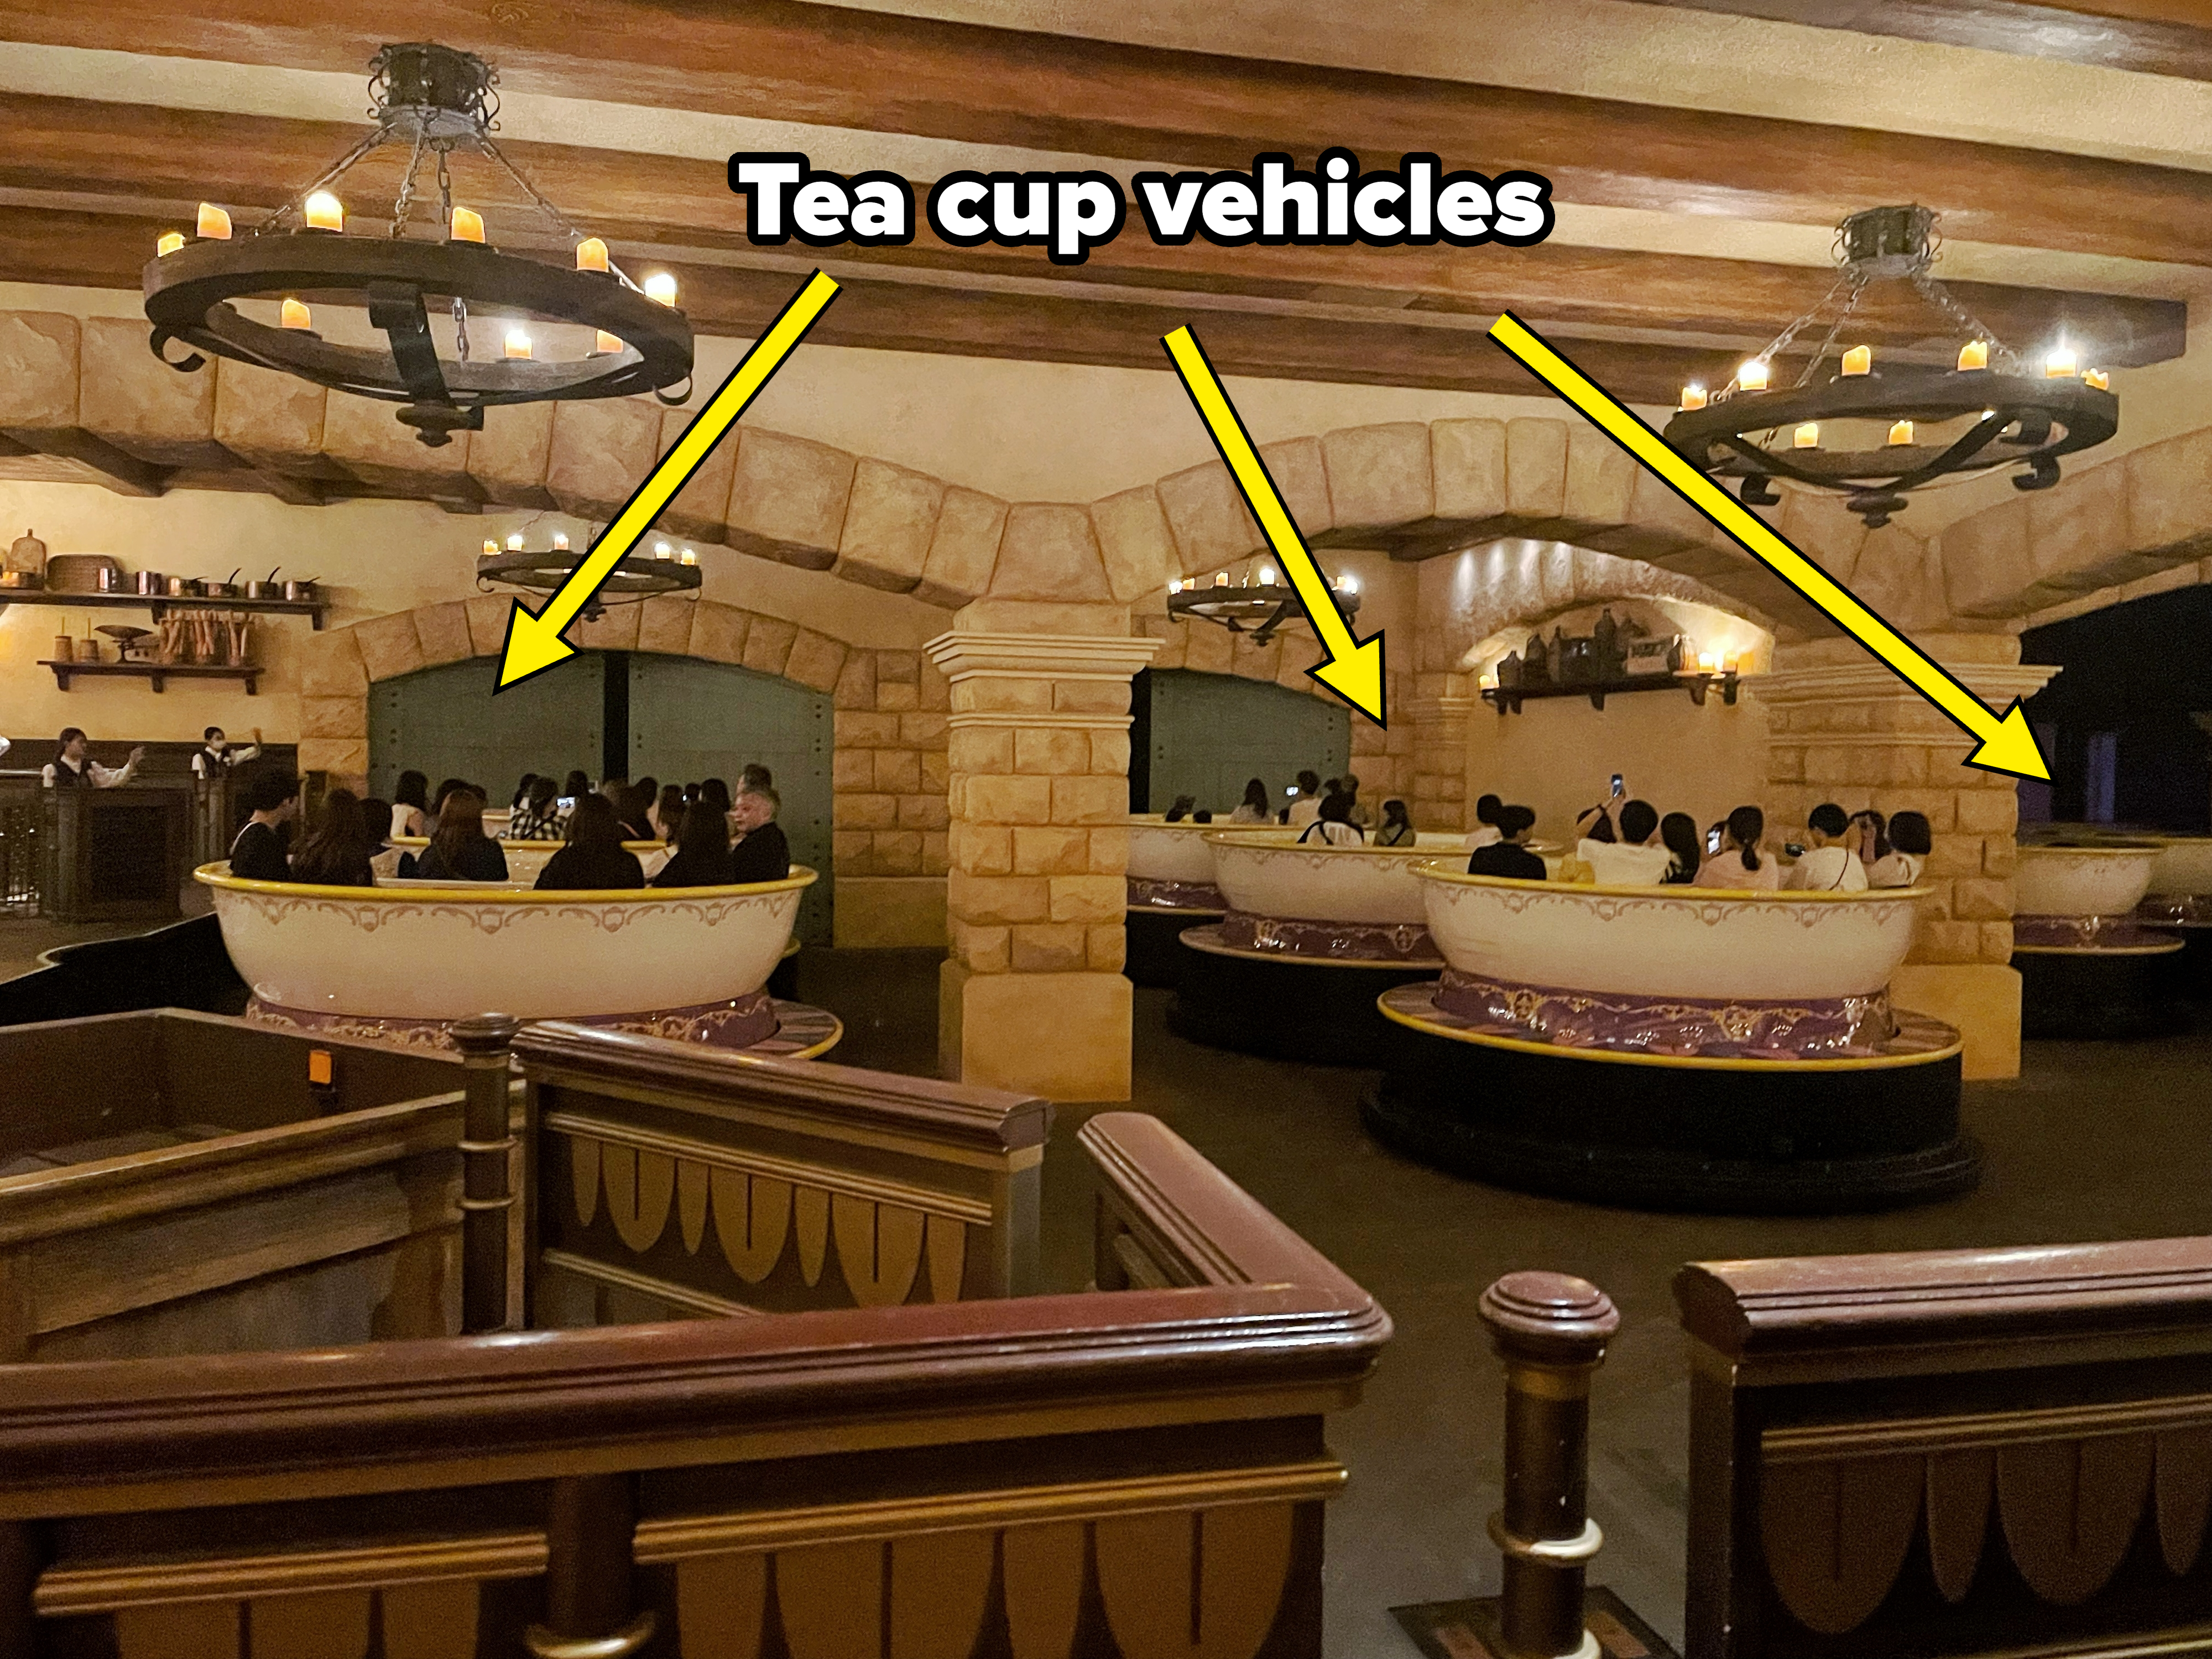 Ride with multiple large teacup-shaped cars on a rotating platform in an indoor setting, with people seated inside the teacups